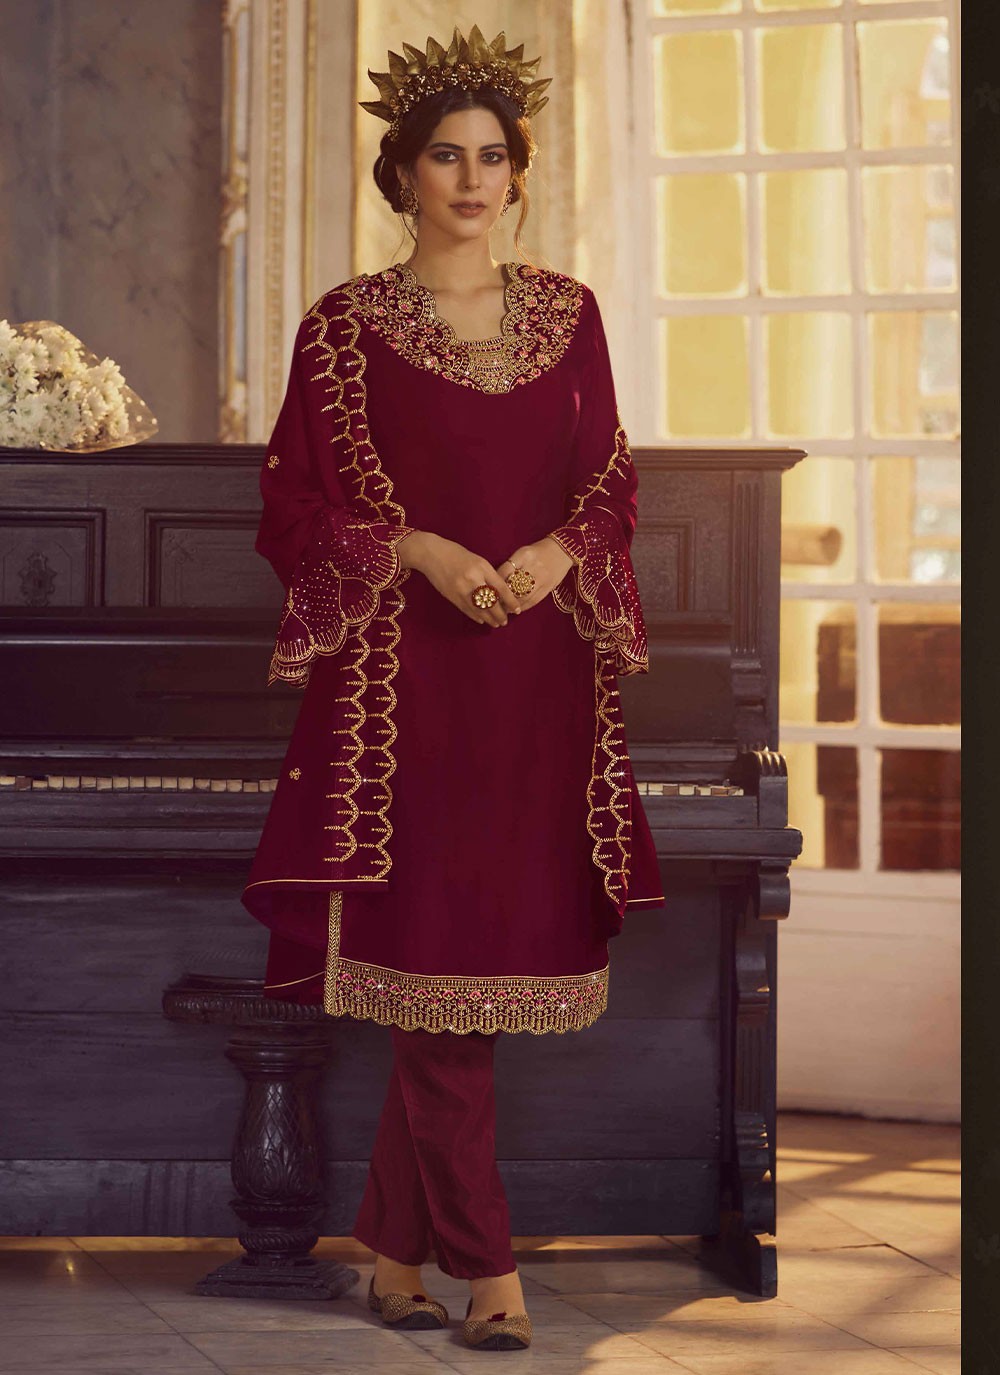 Wedding Pant Style Suit In Maroon